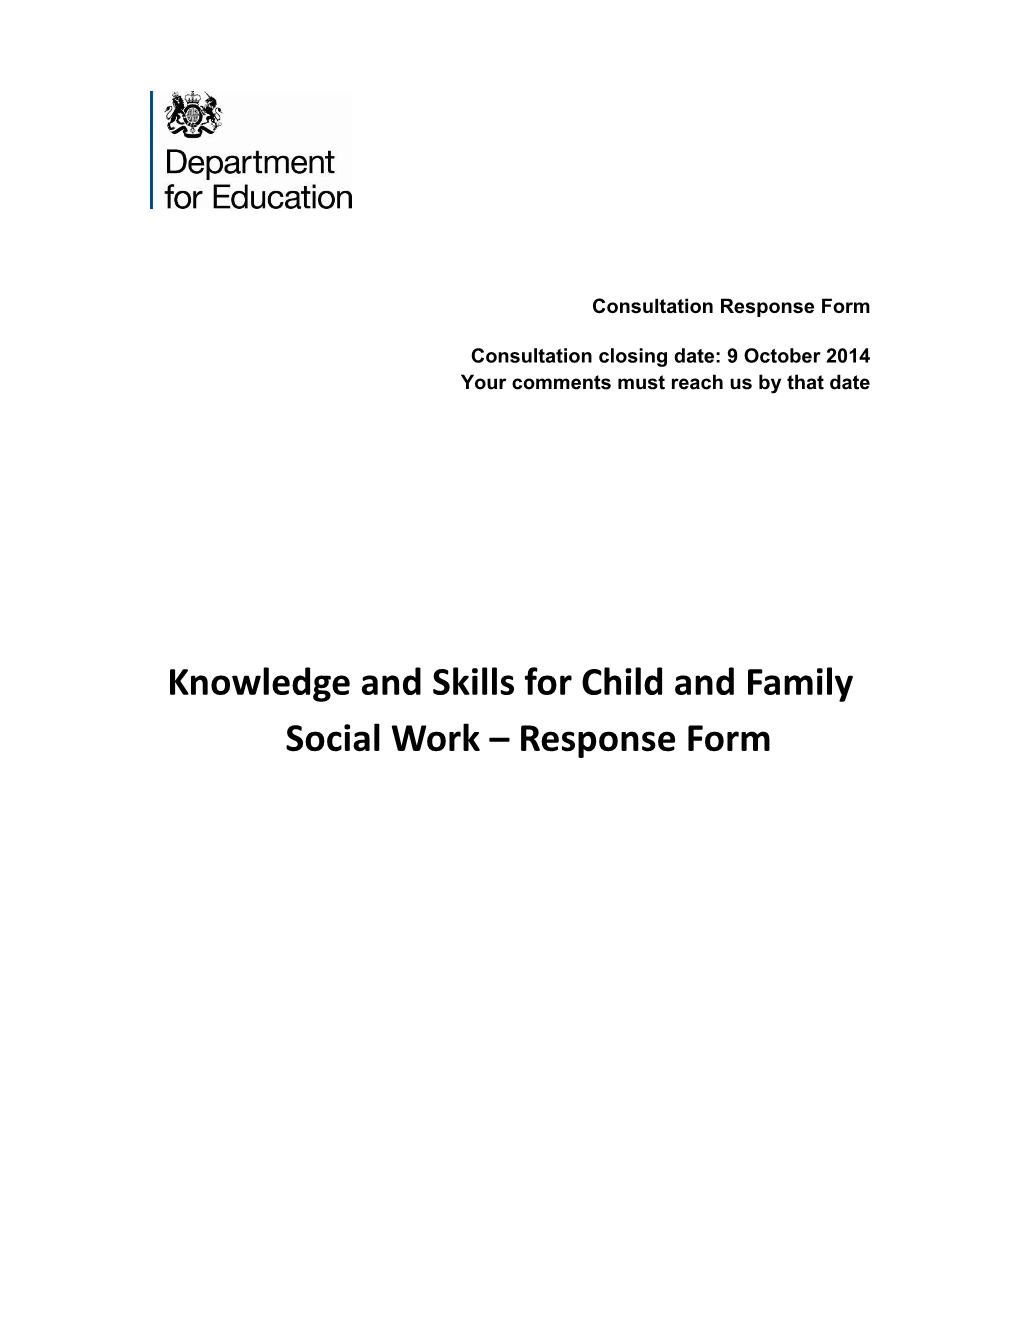 Knowledge and Skills for Child and Family Social Work Response Form